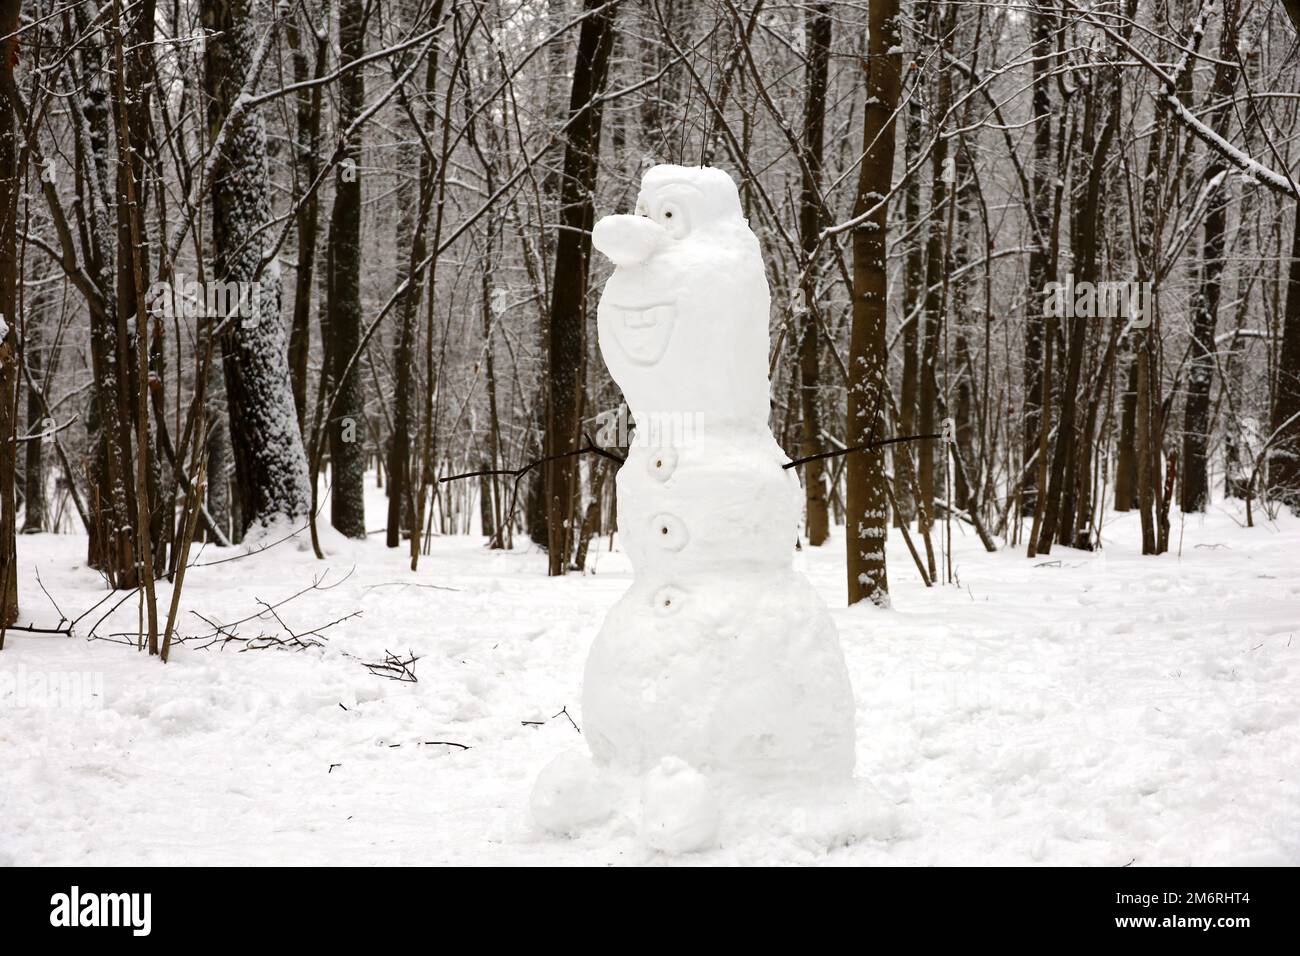 Snowman in a winter park. Children's creativity, leisure at cold weather Stock Photo